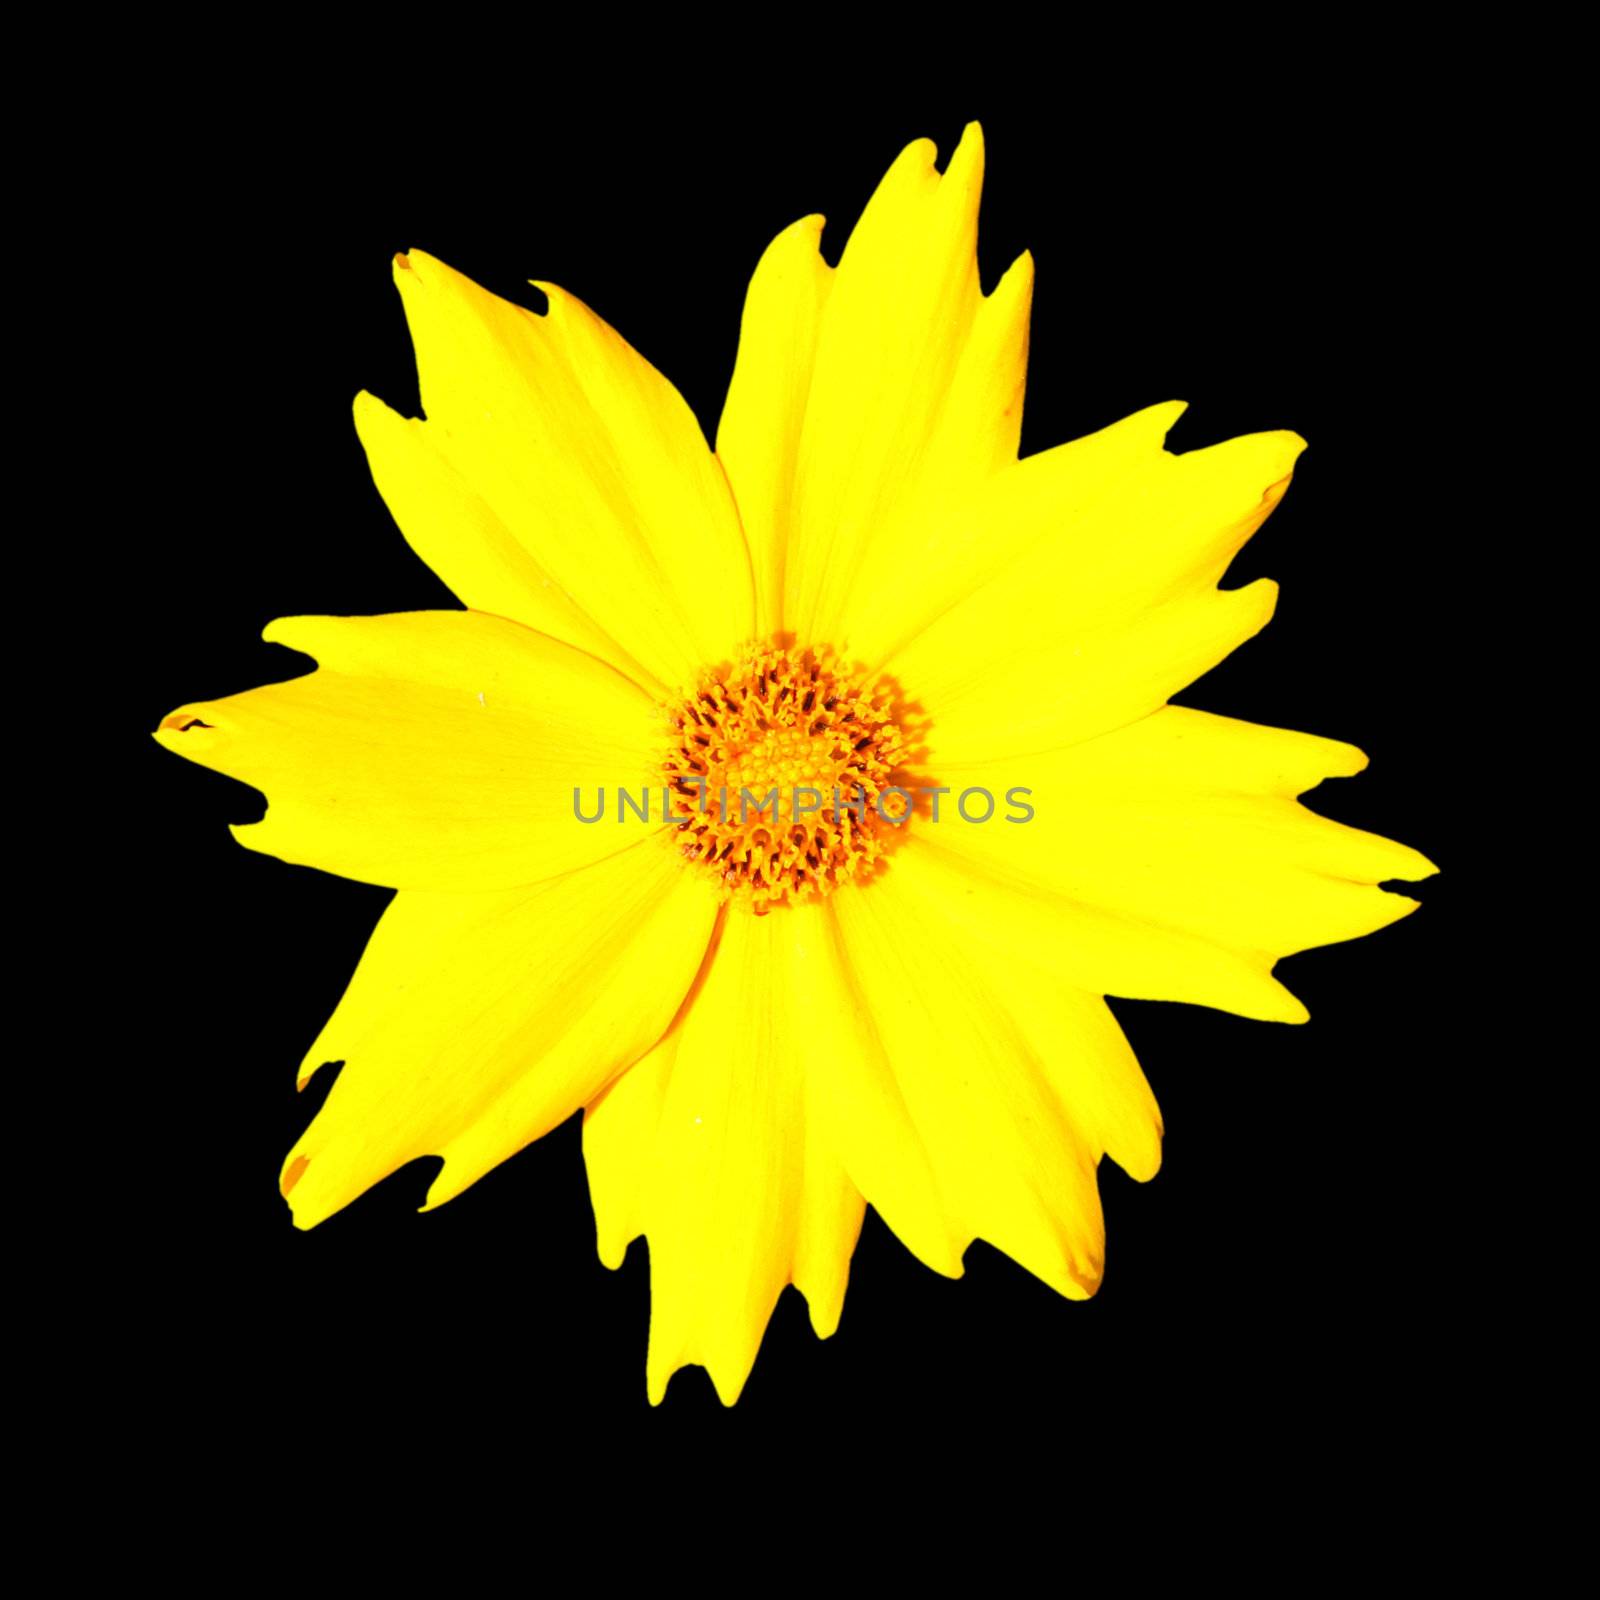 Yellow Flower - Coreopsis Pubescens from the Compositae family by Cloudia